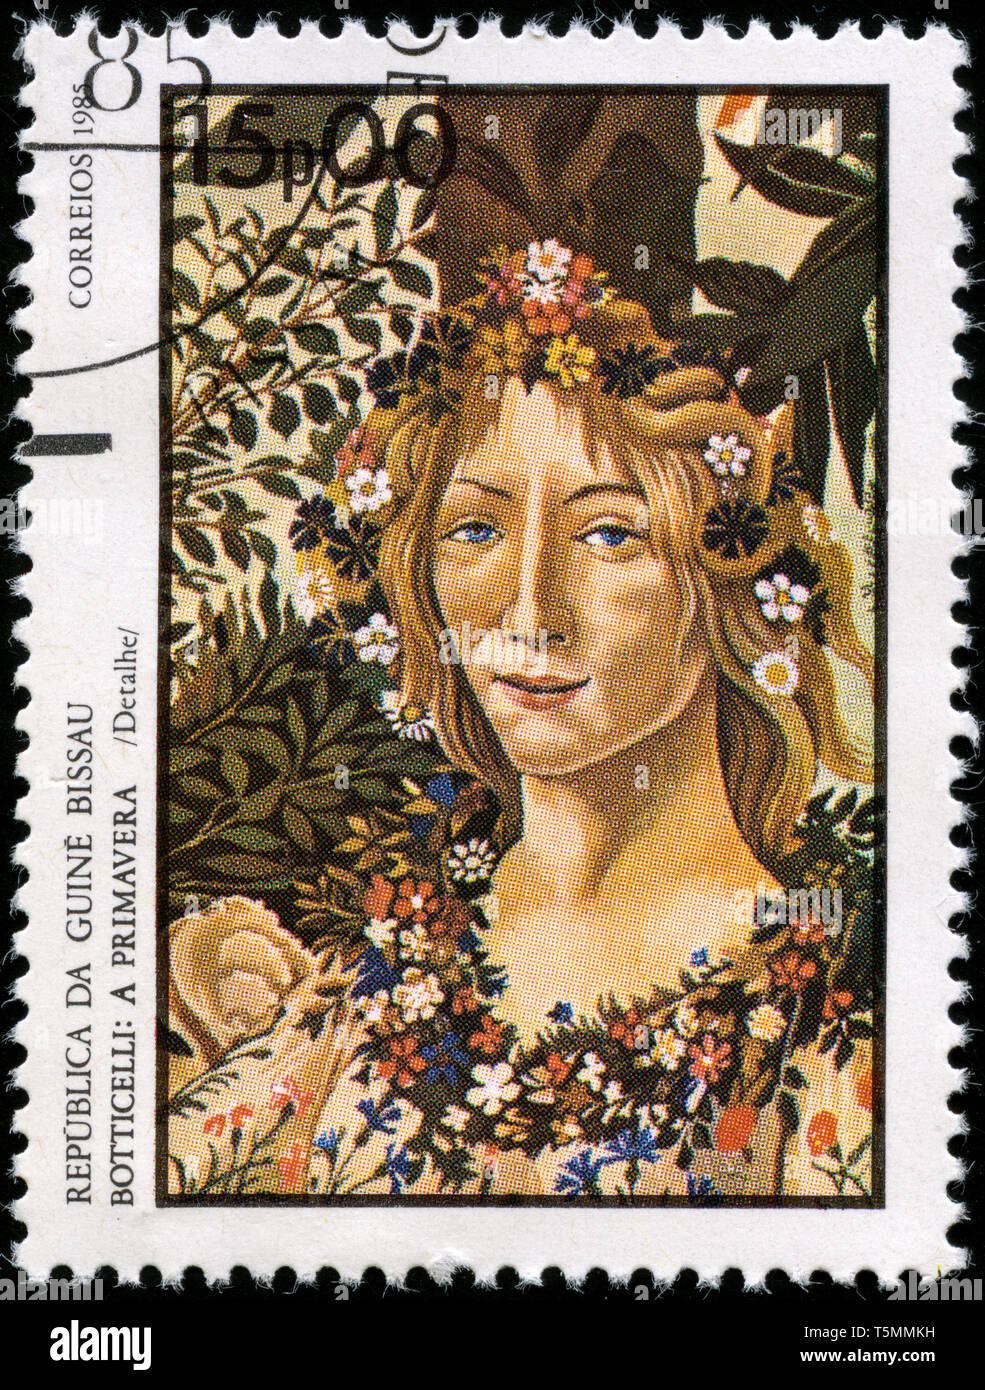 Postage stamp from Guinea-Bissau in the International Philatelic Exhibition - Italy 85 Stock Photo